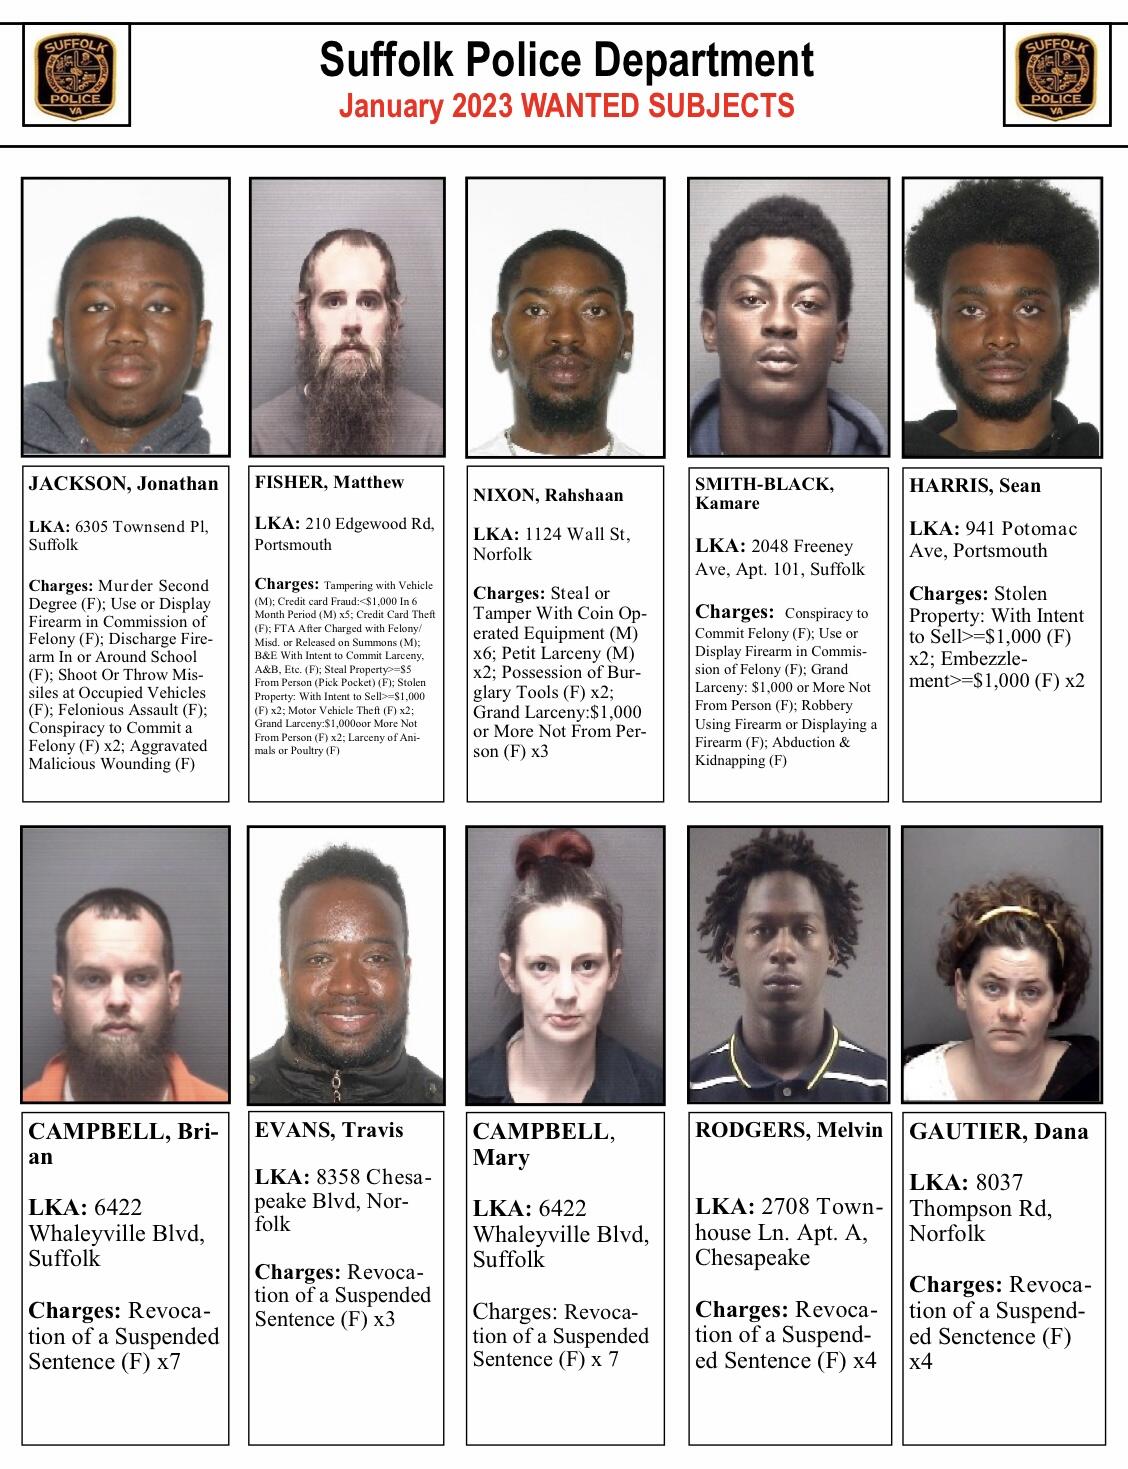 Suffolk’s Most Wanted January 2023 (Suffolk Police Department